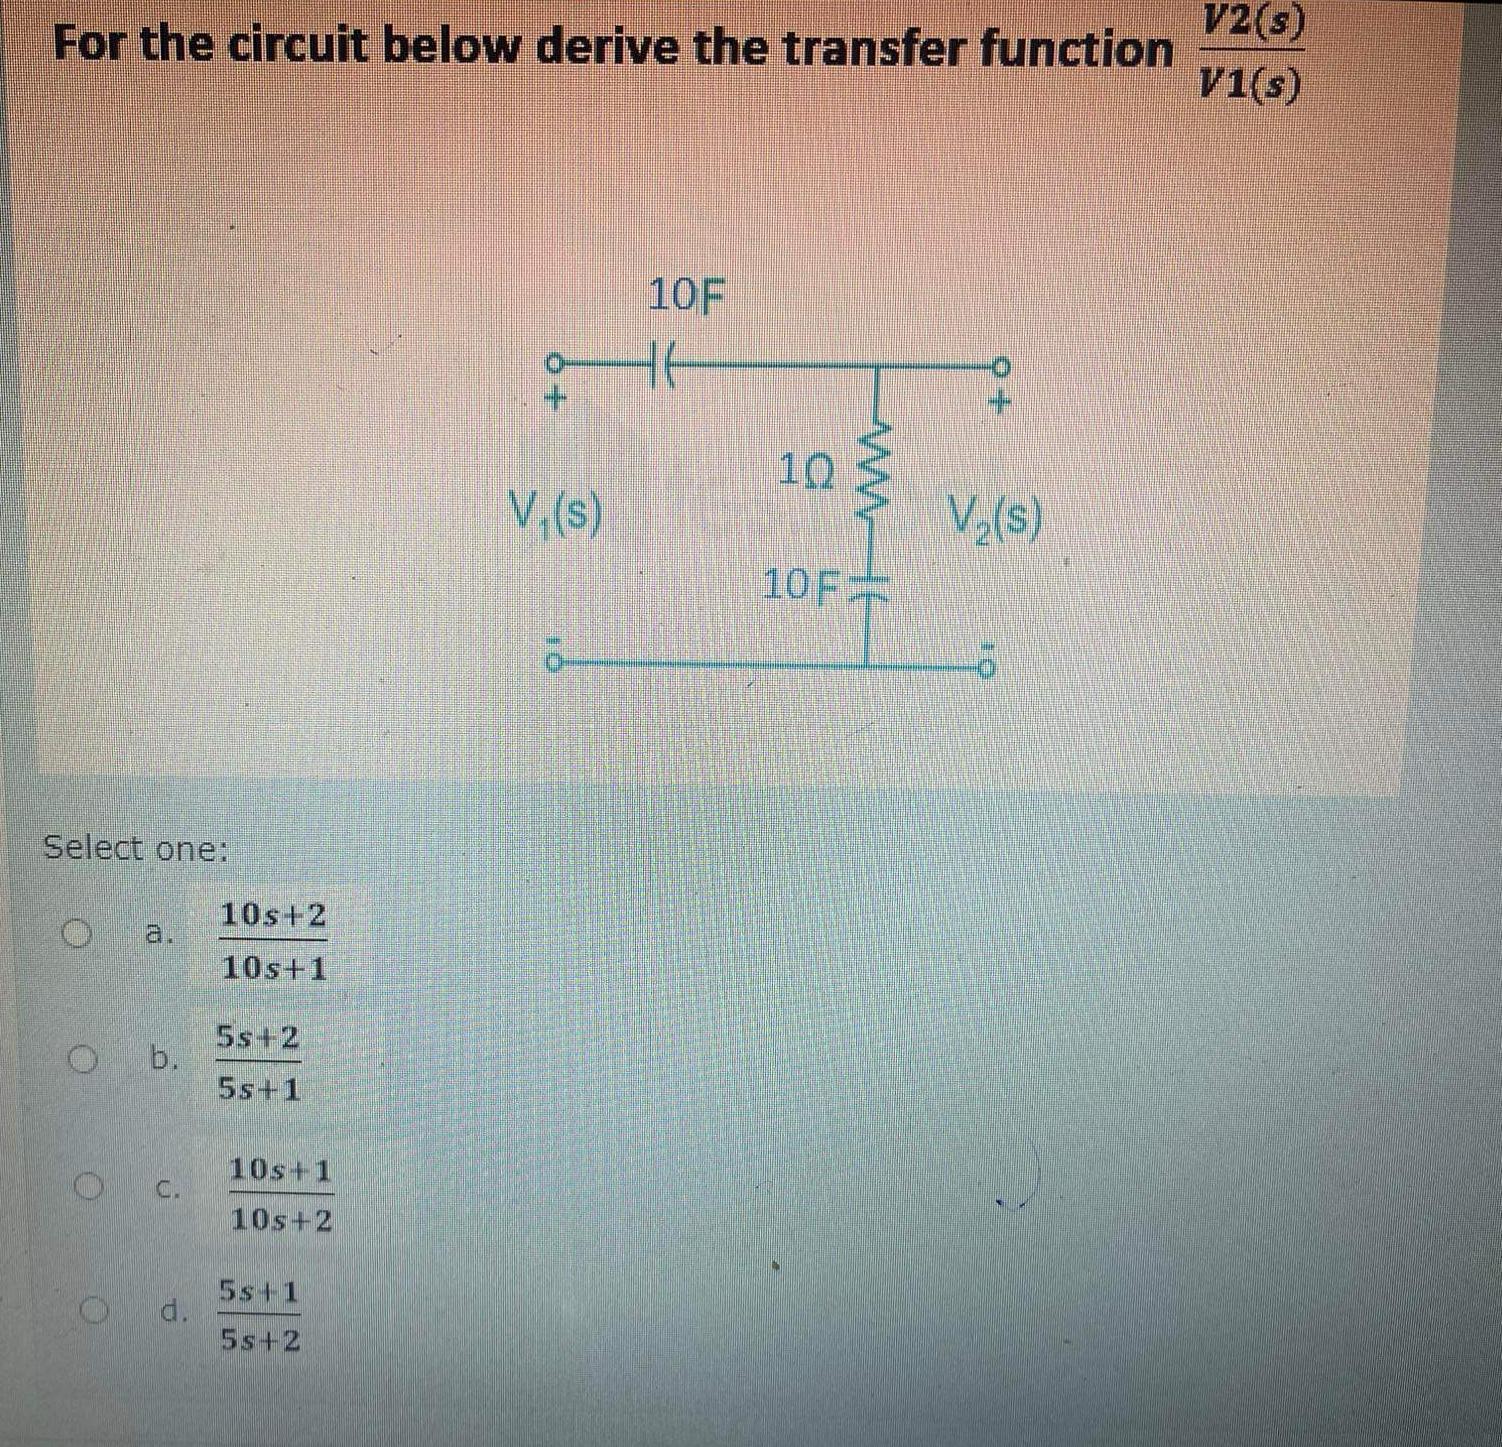 For the circuit below derive the transfer function Select one: Ob. O C. d. 10s+2 10s+1 5s+2 5s+1 10s+1 10s+2